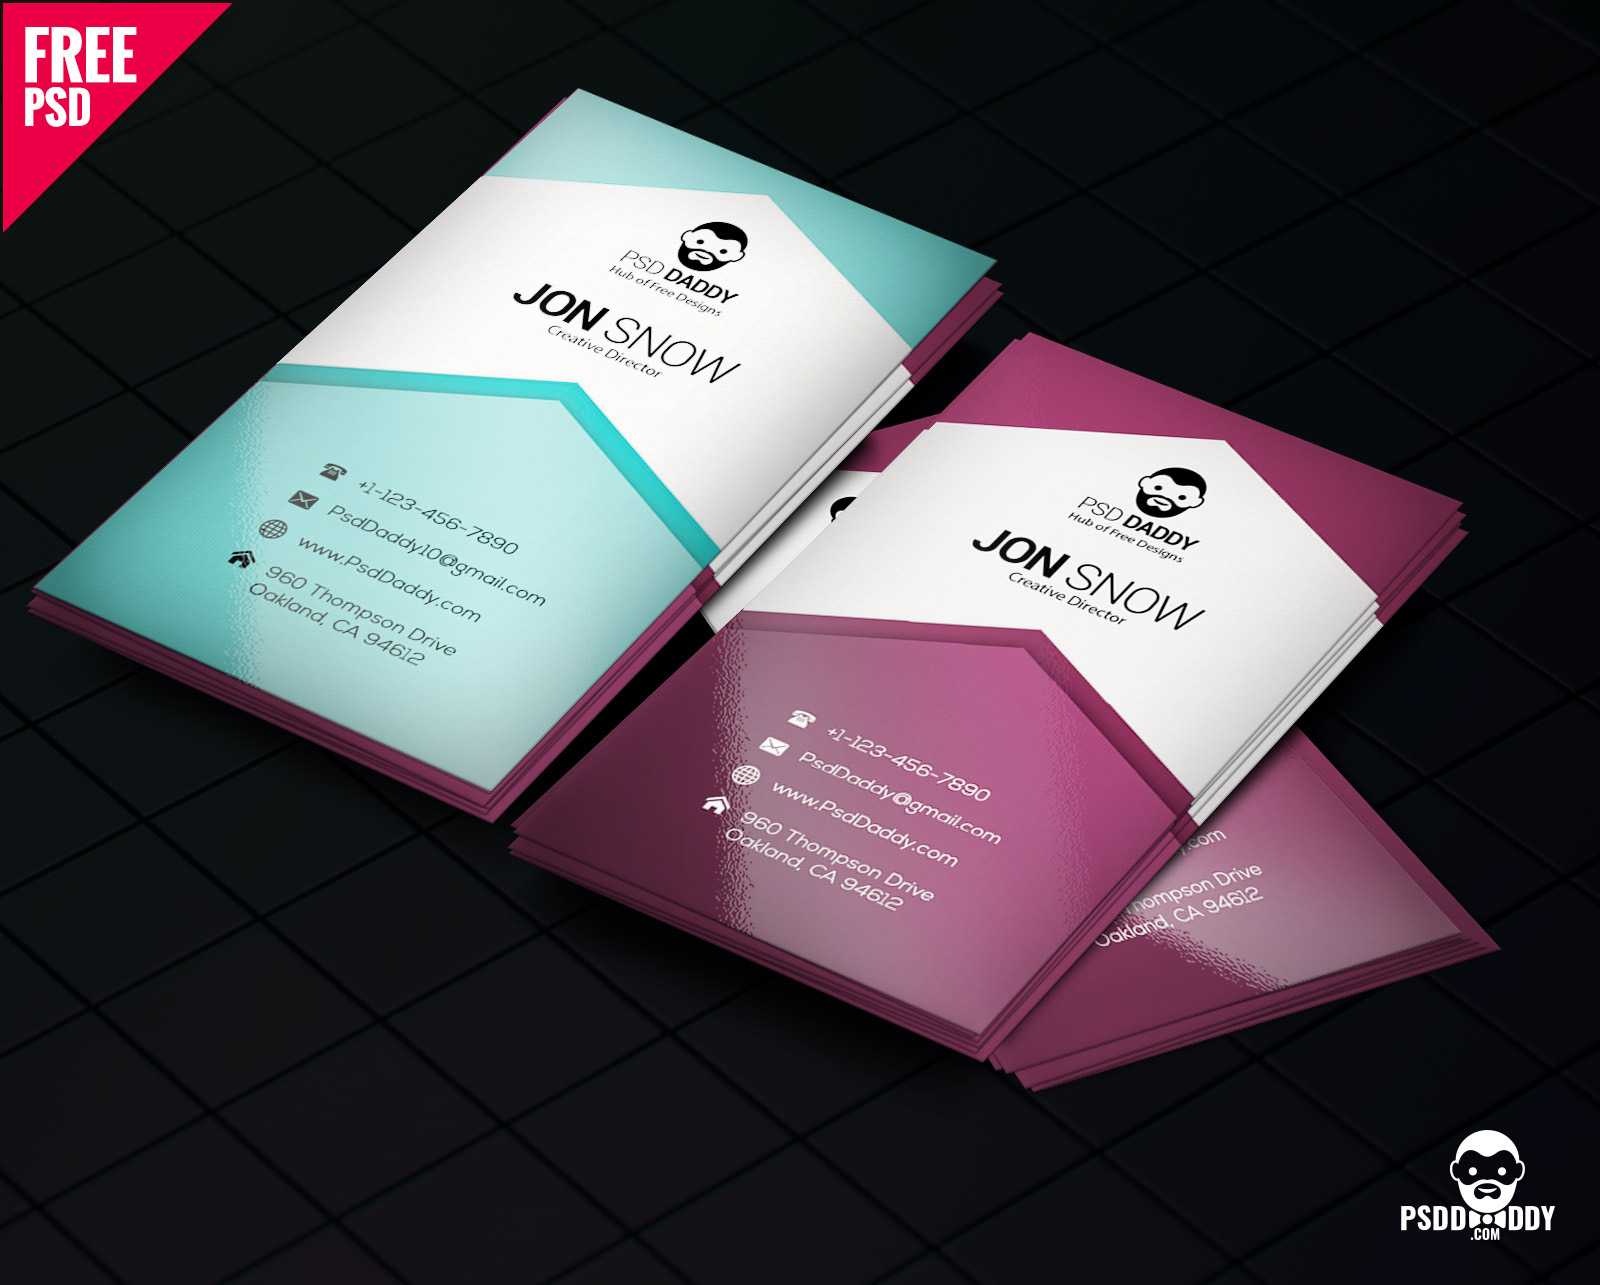 Download]Creative Business Card Psd Free | Psddaddy Throughout Business Card Size Psd Template